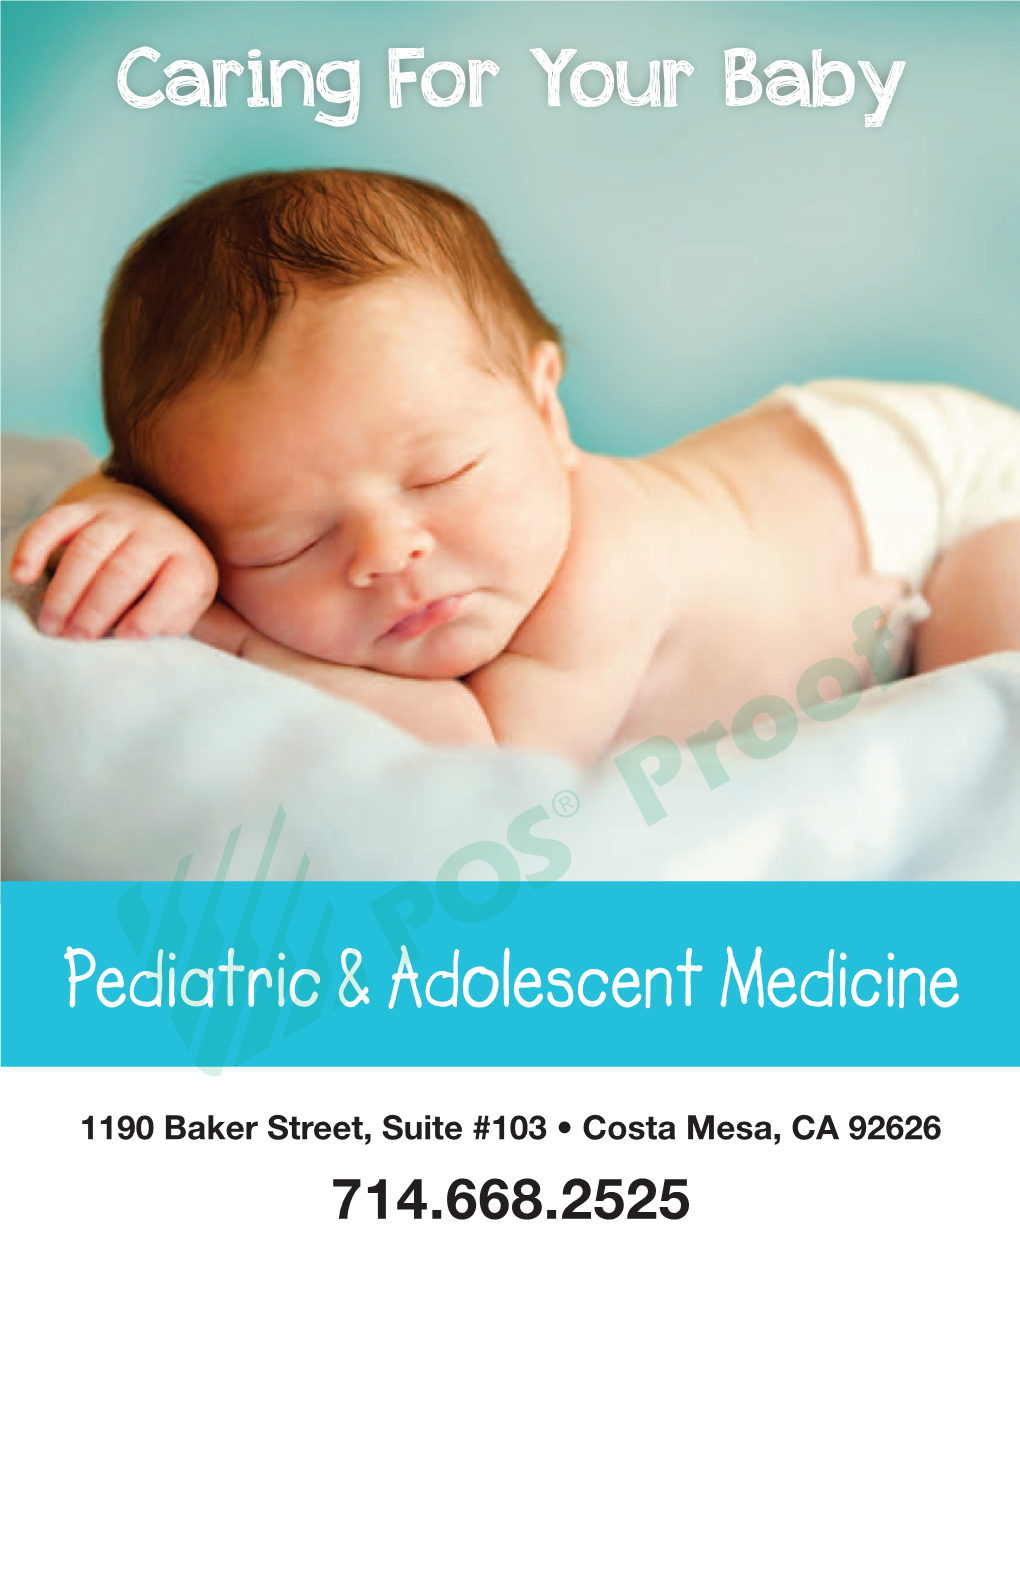 Caring for Your Baby Pediatric & Adolescent Medicine